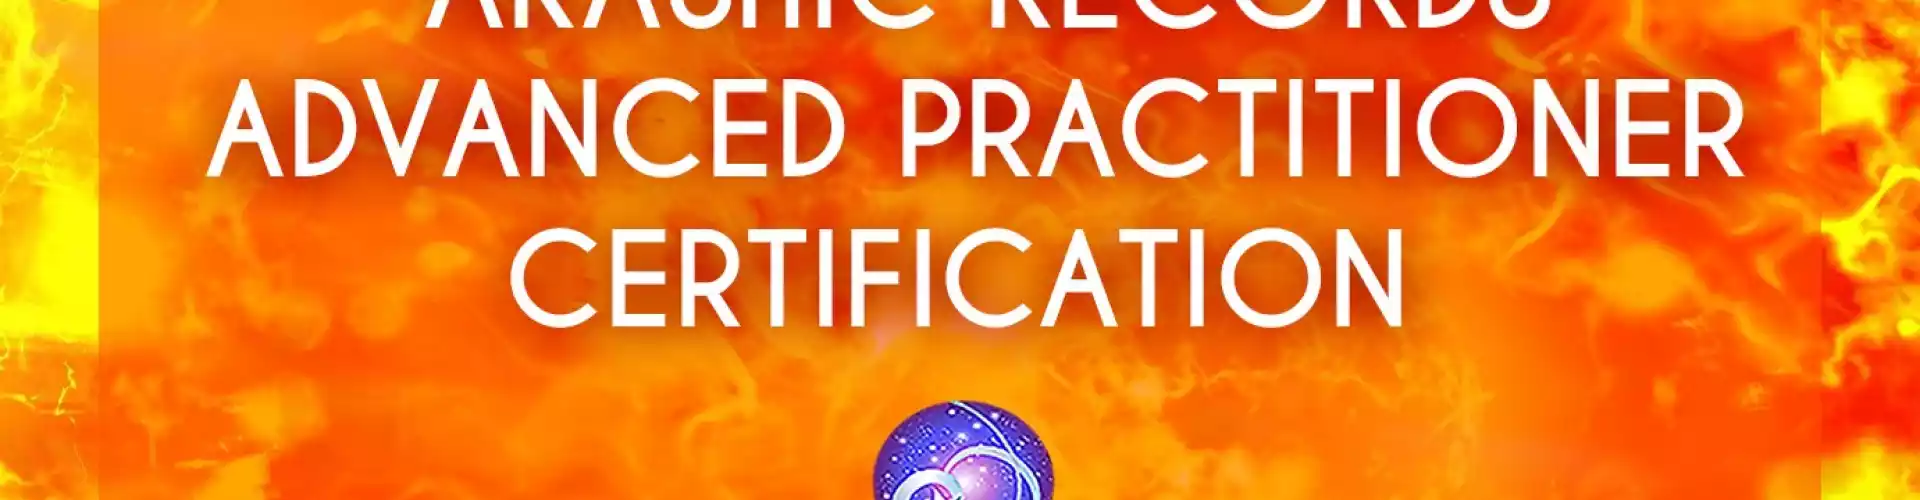 Advanced Practitioner Certification